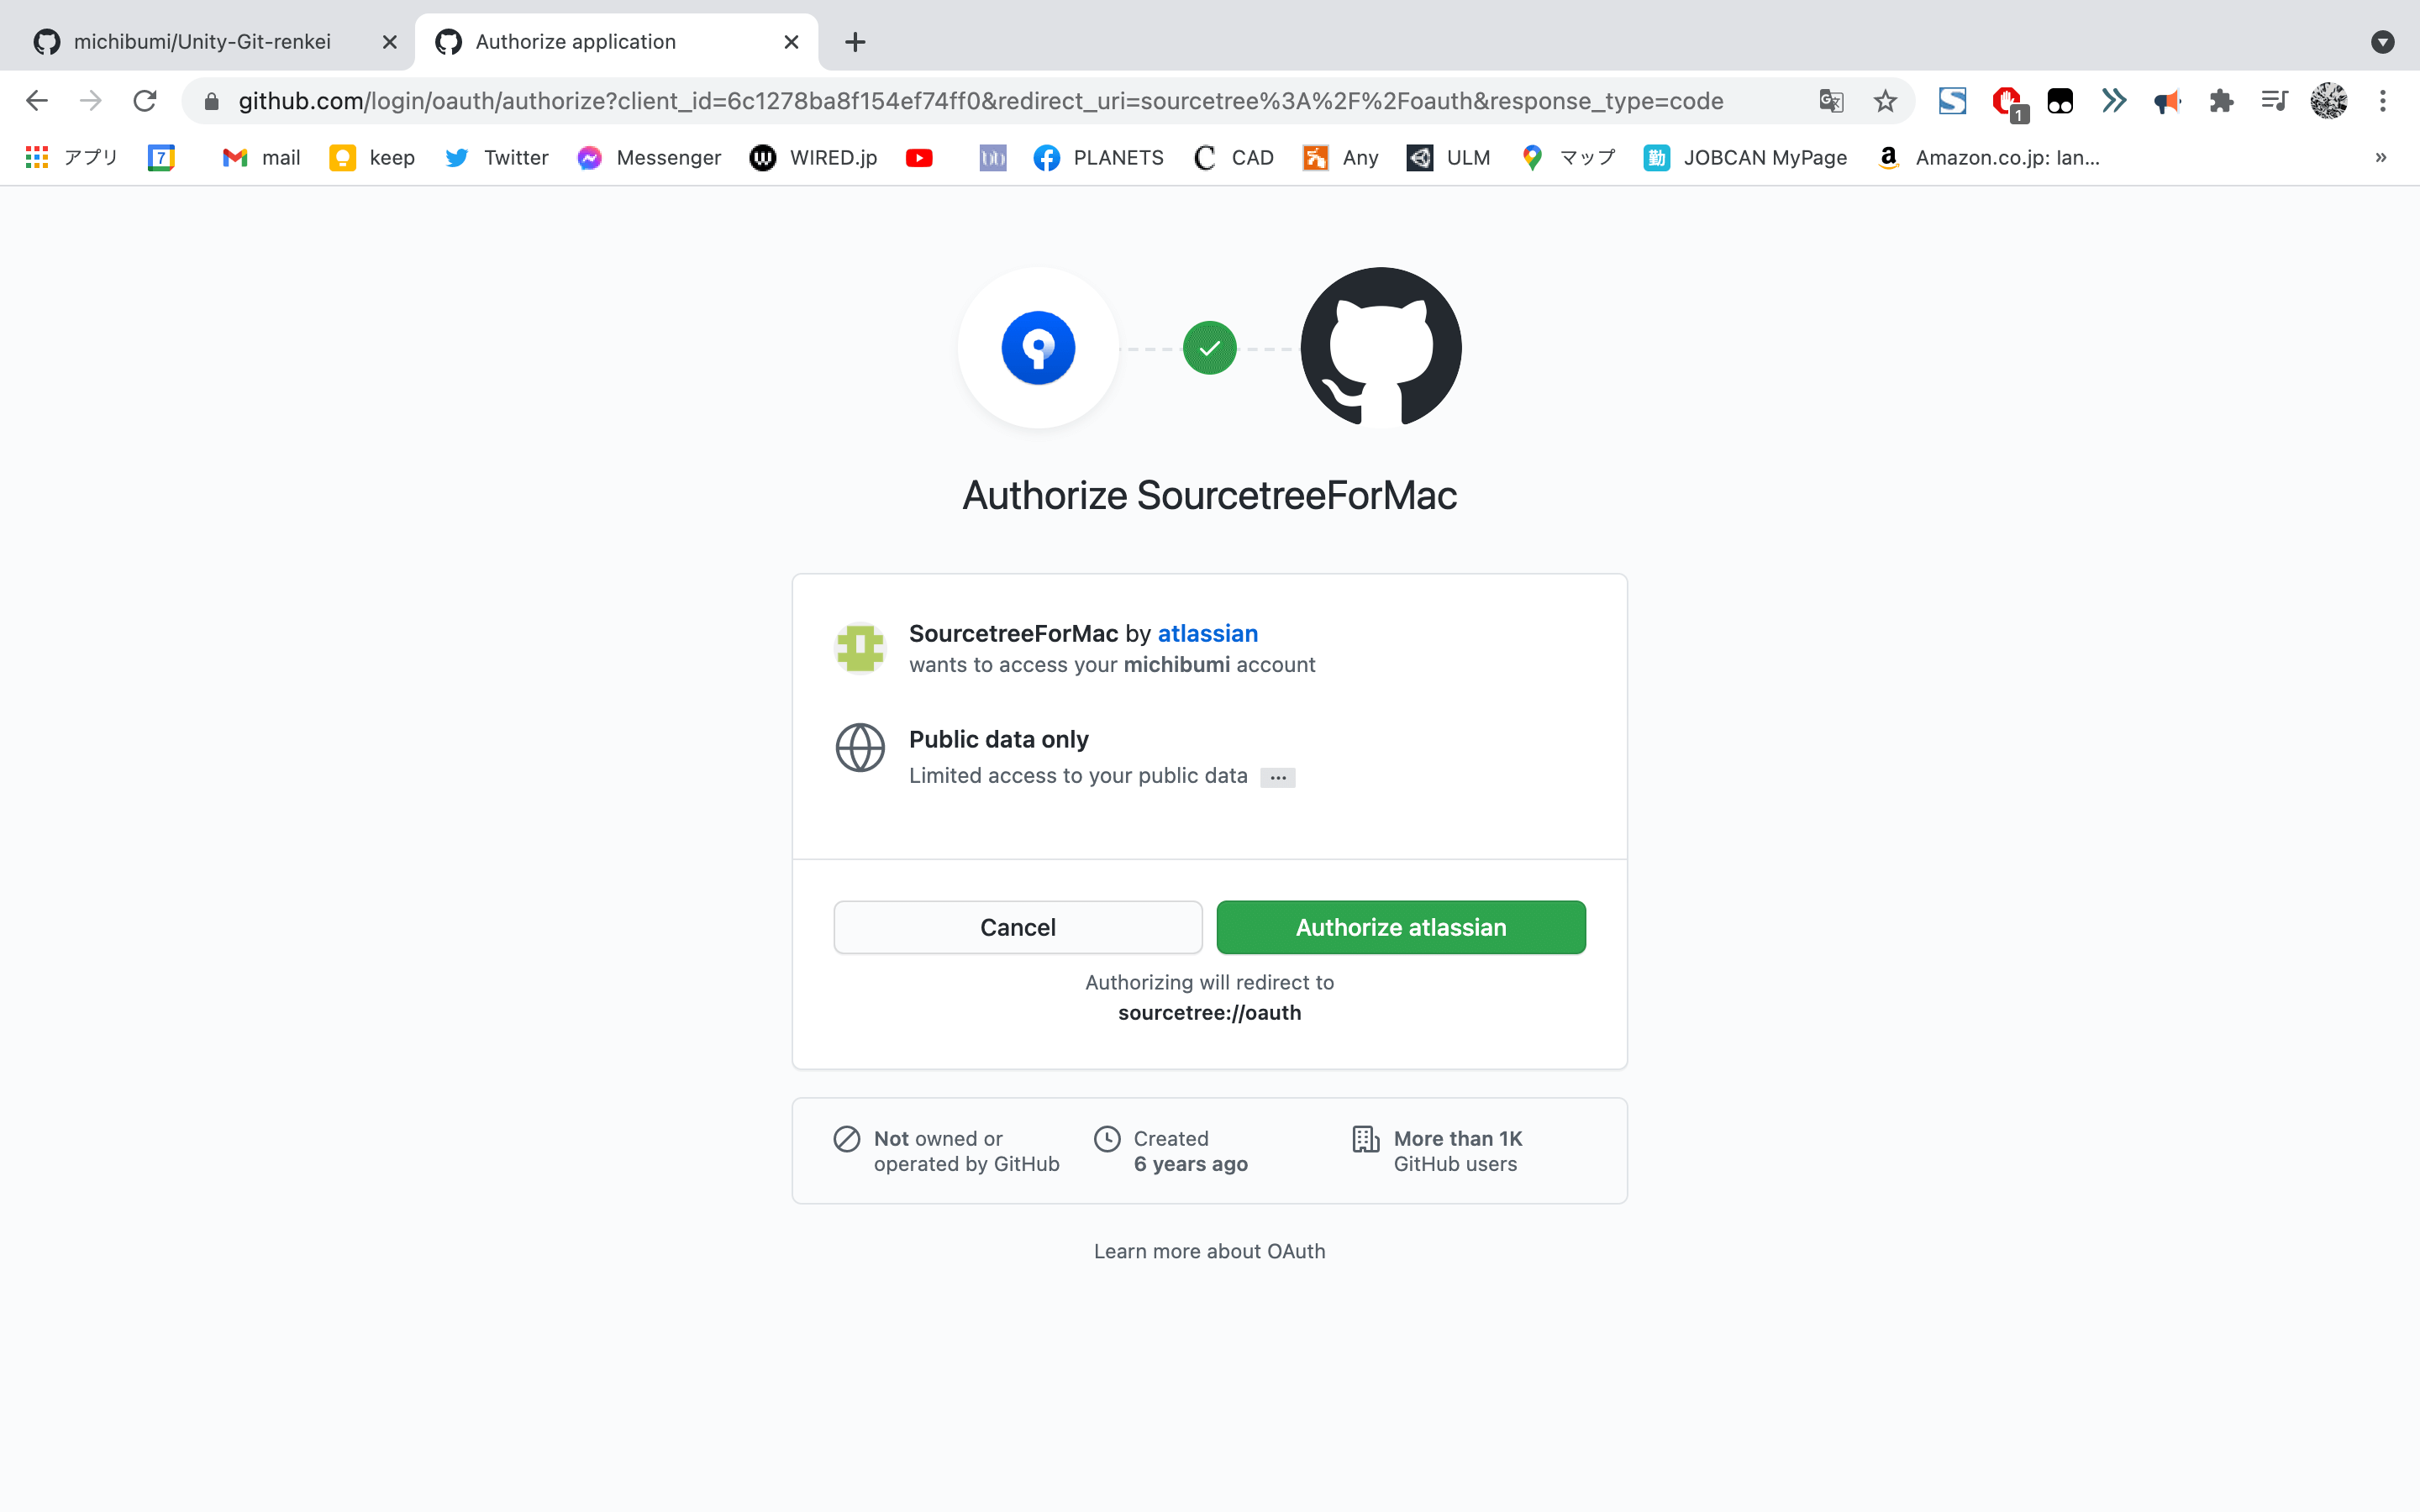 Account connection screen. Select the green "Authorize atlassian" button.